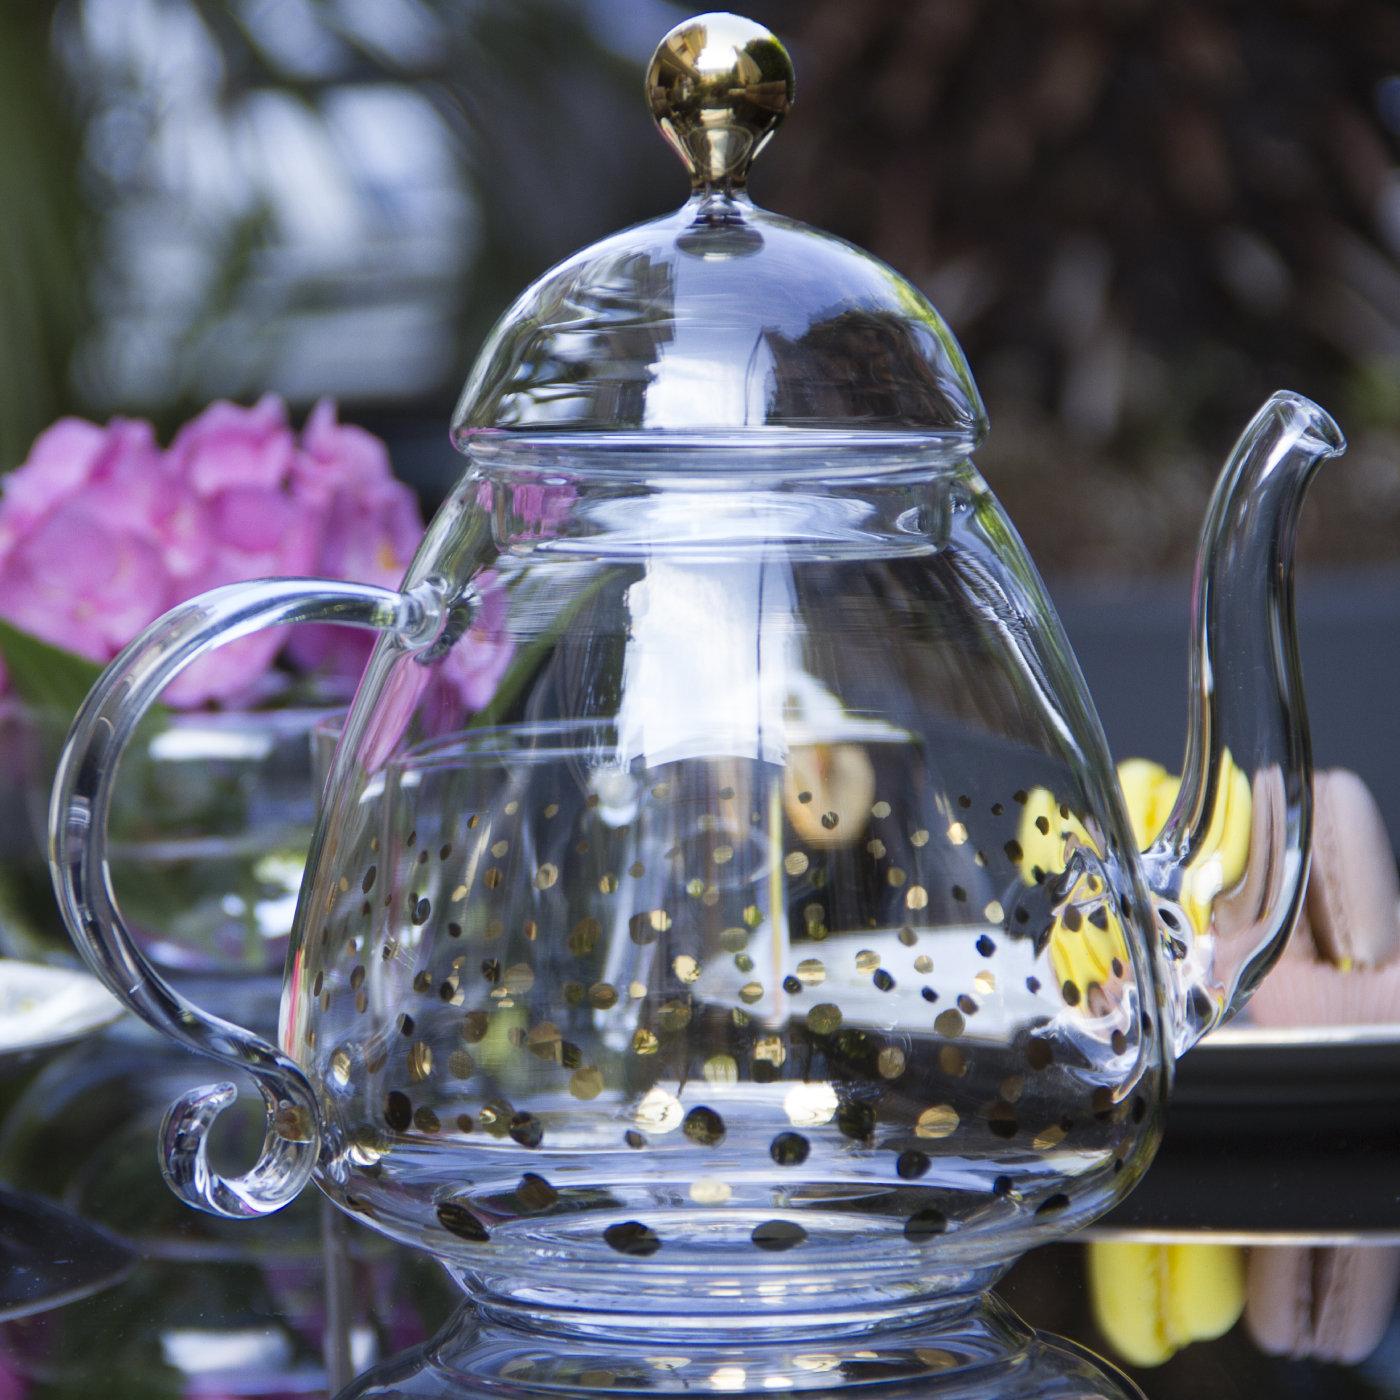 This stunning teapot is sure to make a sophisticated statement on any occasion. It was crafted of handmade mouth-blown transparent glass and features a traditional shape with a sinuous bottom, an upward spout, a curved handle with a curl, and a